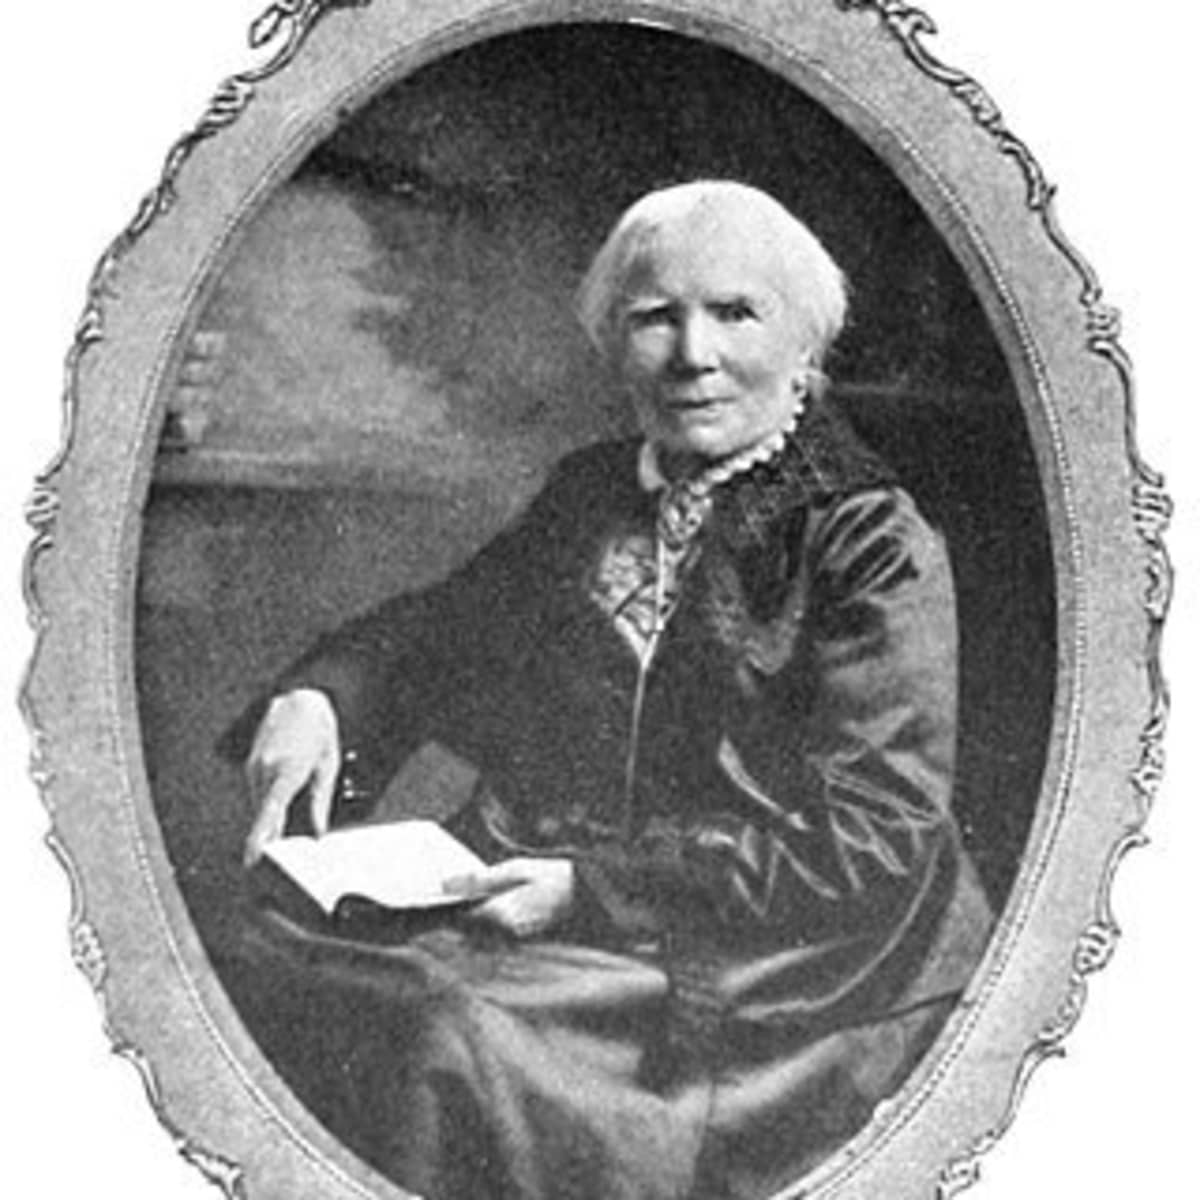 GREAT WOMEN POSTCARD 'BE WHAT YOU WANT TO BE!' DR ELIZABETH BLACKWELL NEW 